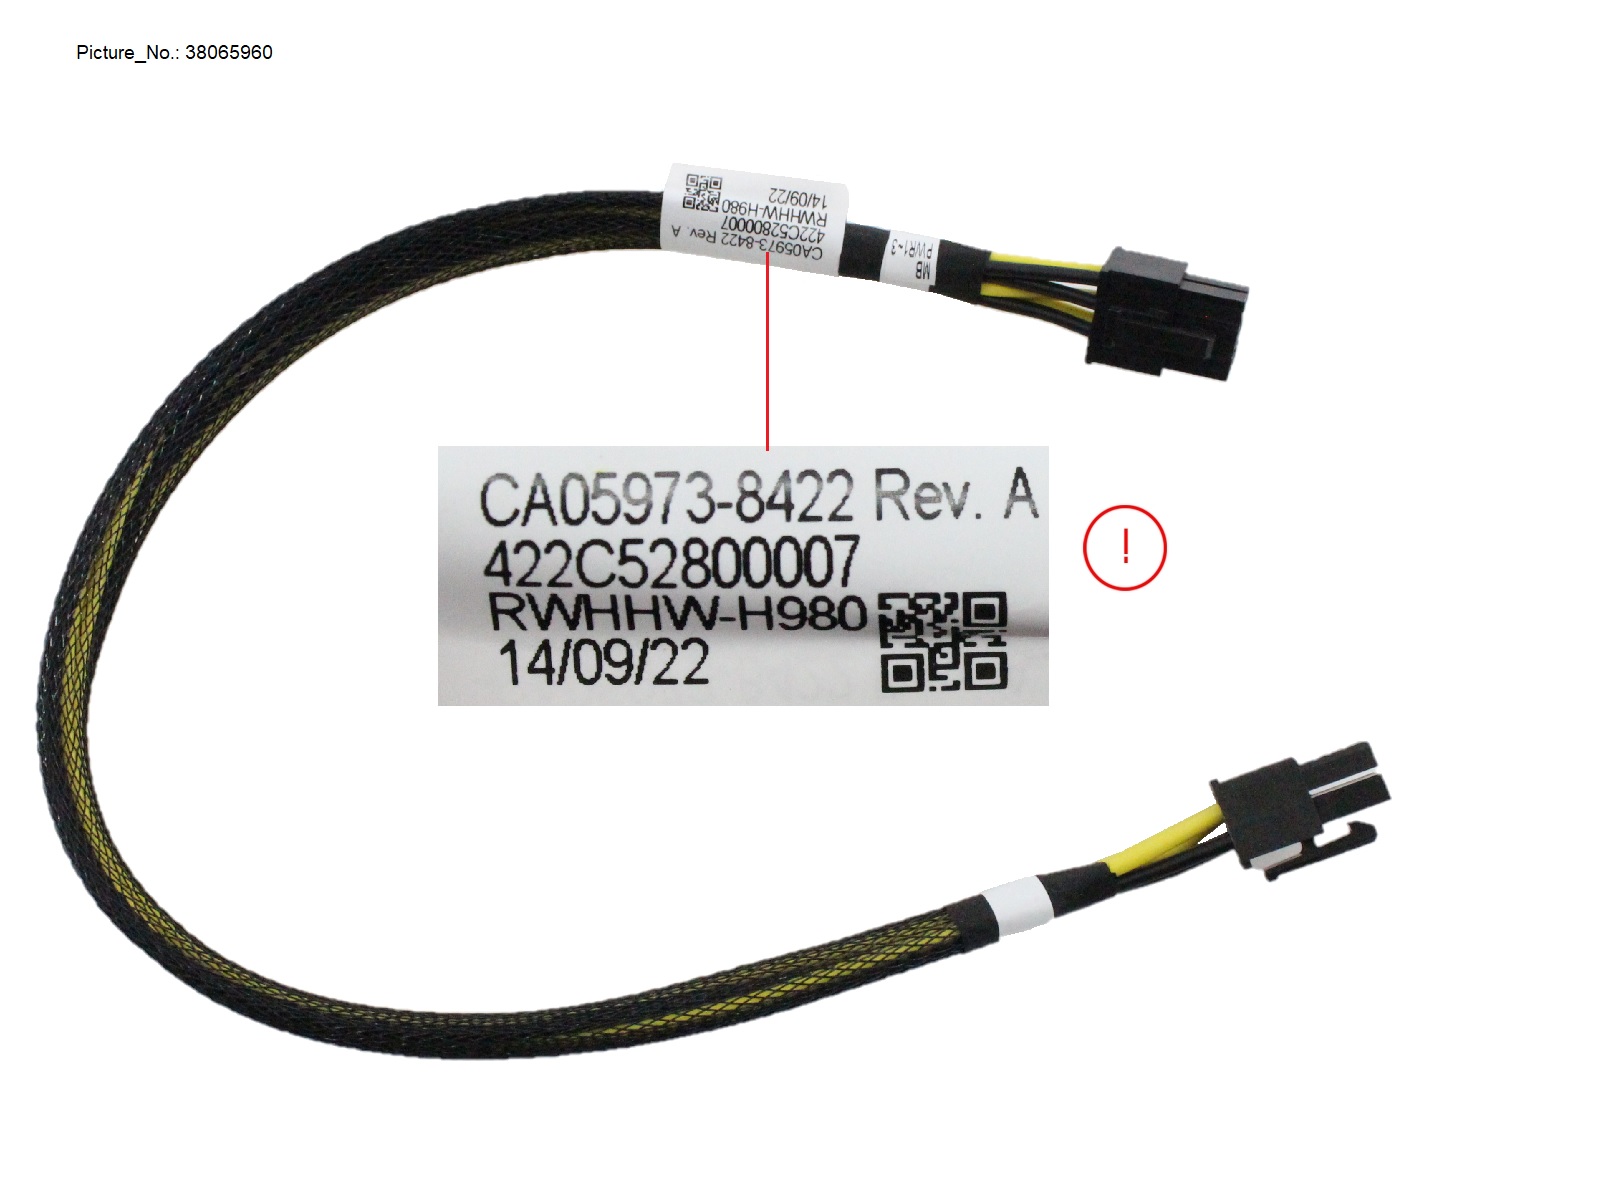 POWER CABLE FOR SAS HSBP-1 (360 MM)